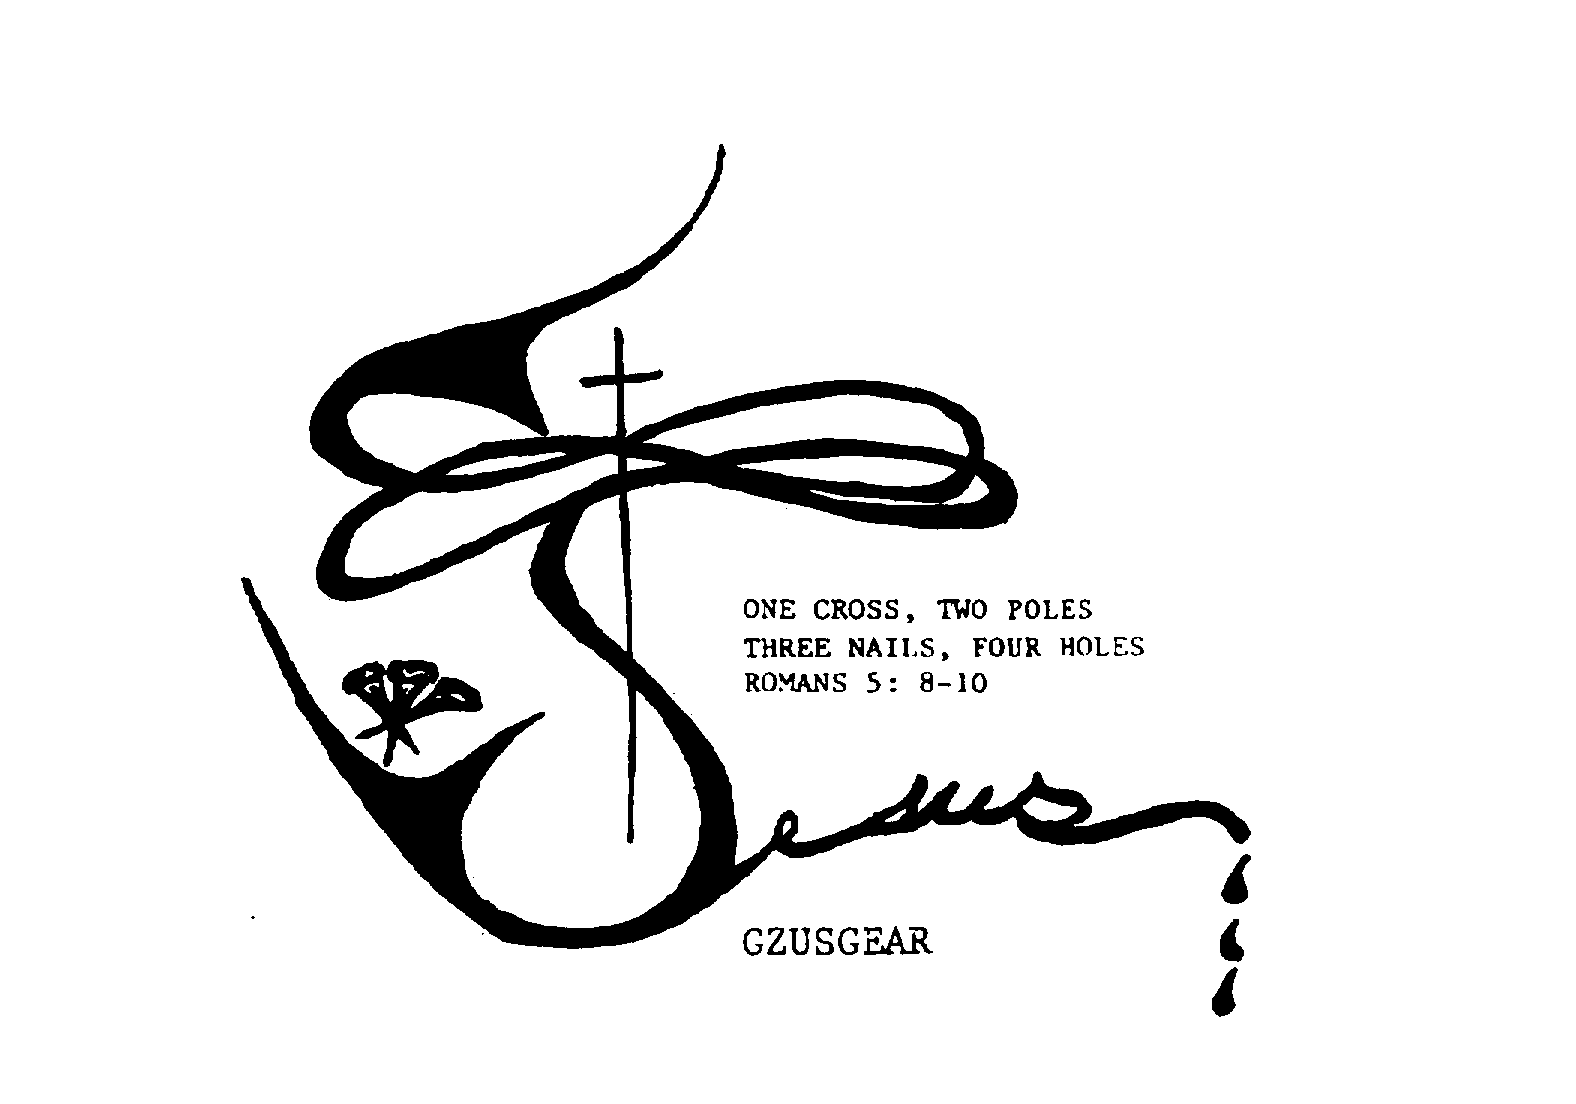  JESUS GZUSGEAR ONE CROSS, TWO POLES THREE NAILS, FOUR HOLES ROMANS 5: 8-10